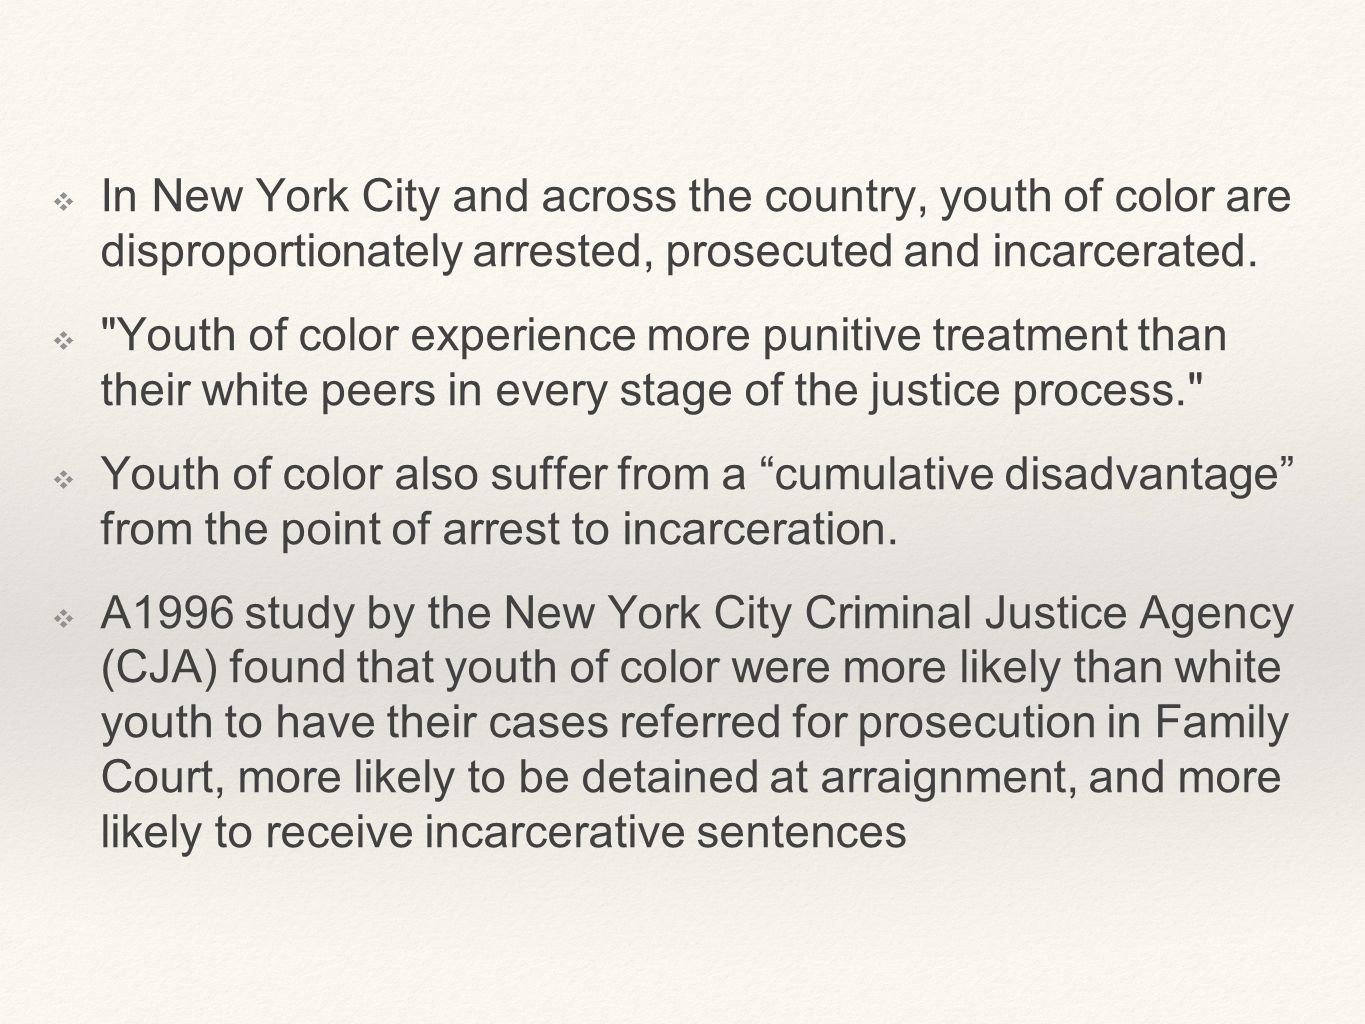 ❖ In New York City and across the country, youth of color are disproportionately arrested, prosecuted and incarcerated.